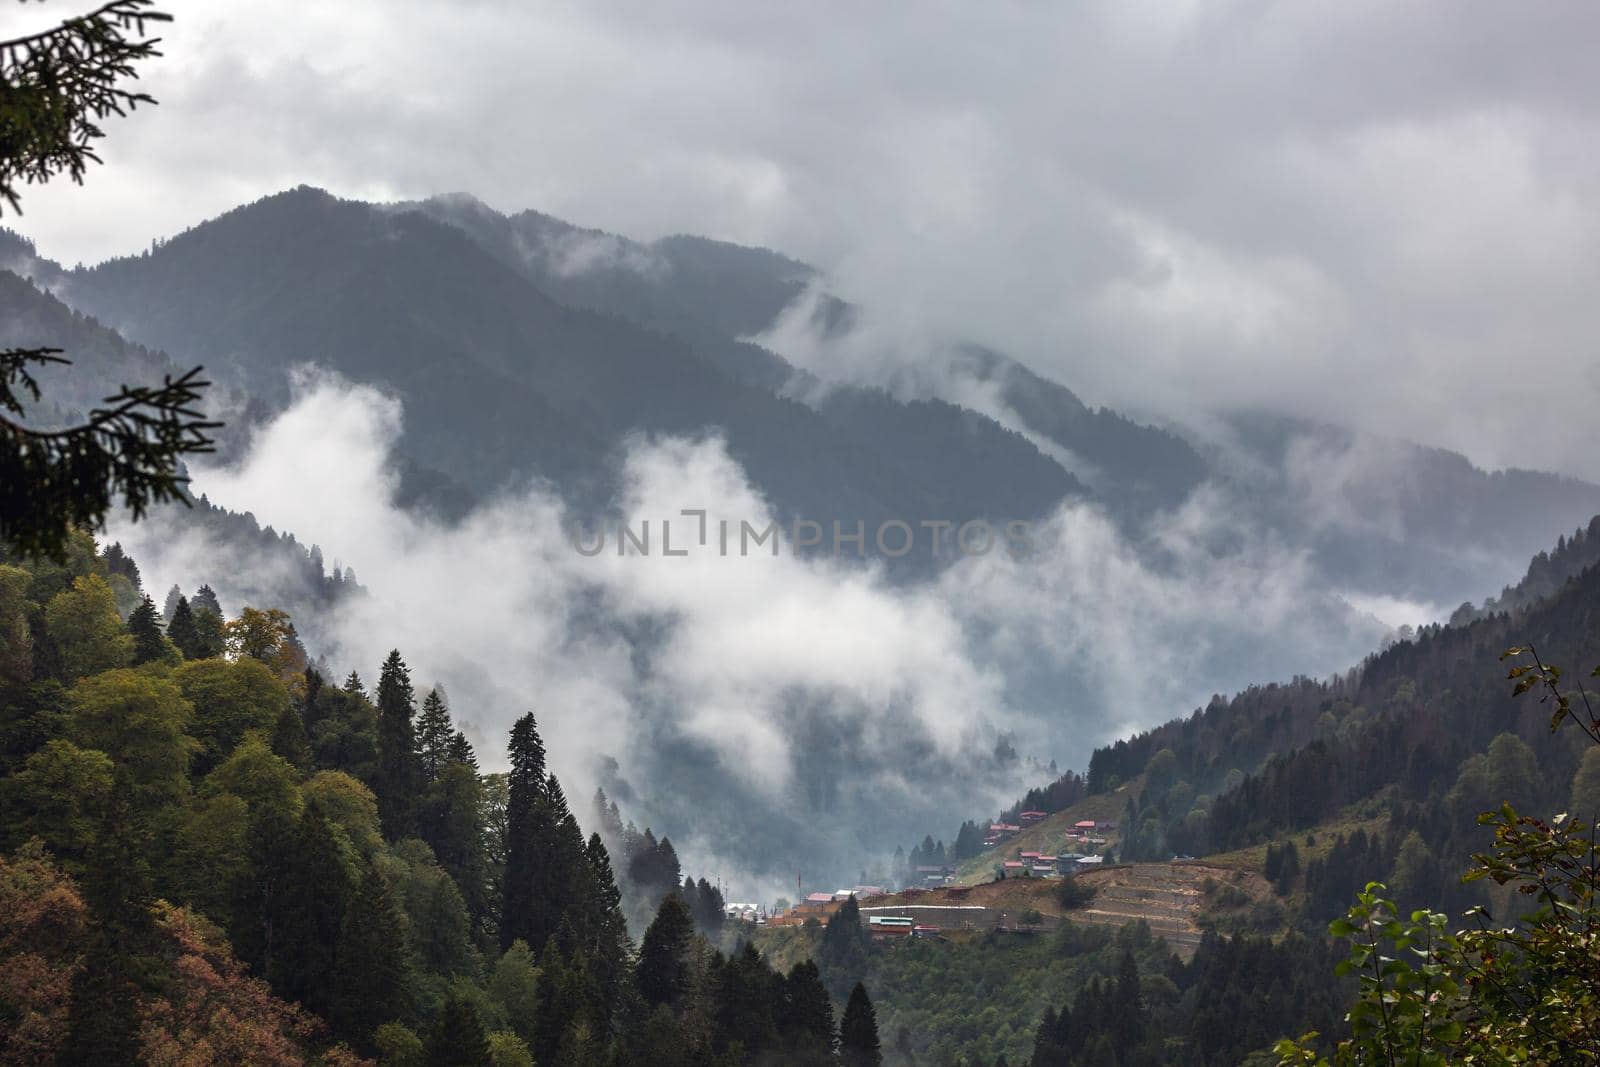 Cloudy Ayder Plateau surrounded by autumn colors near Rize, Turkey.